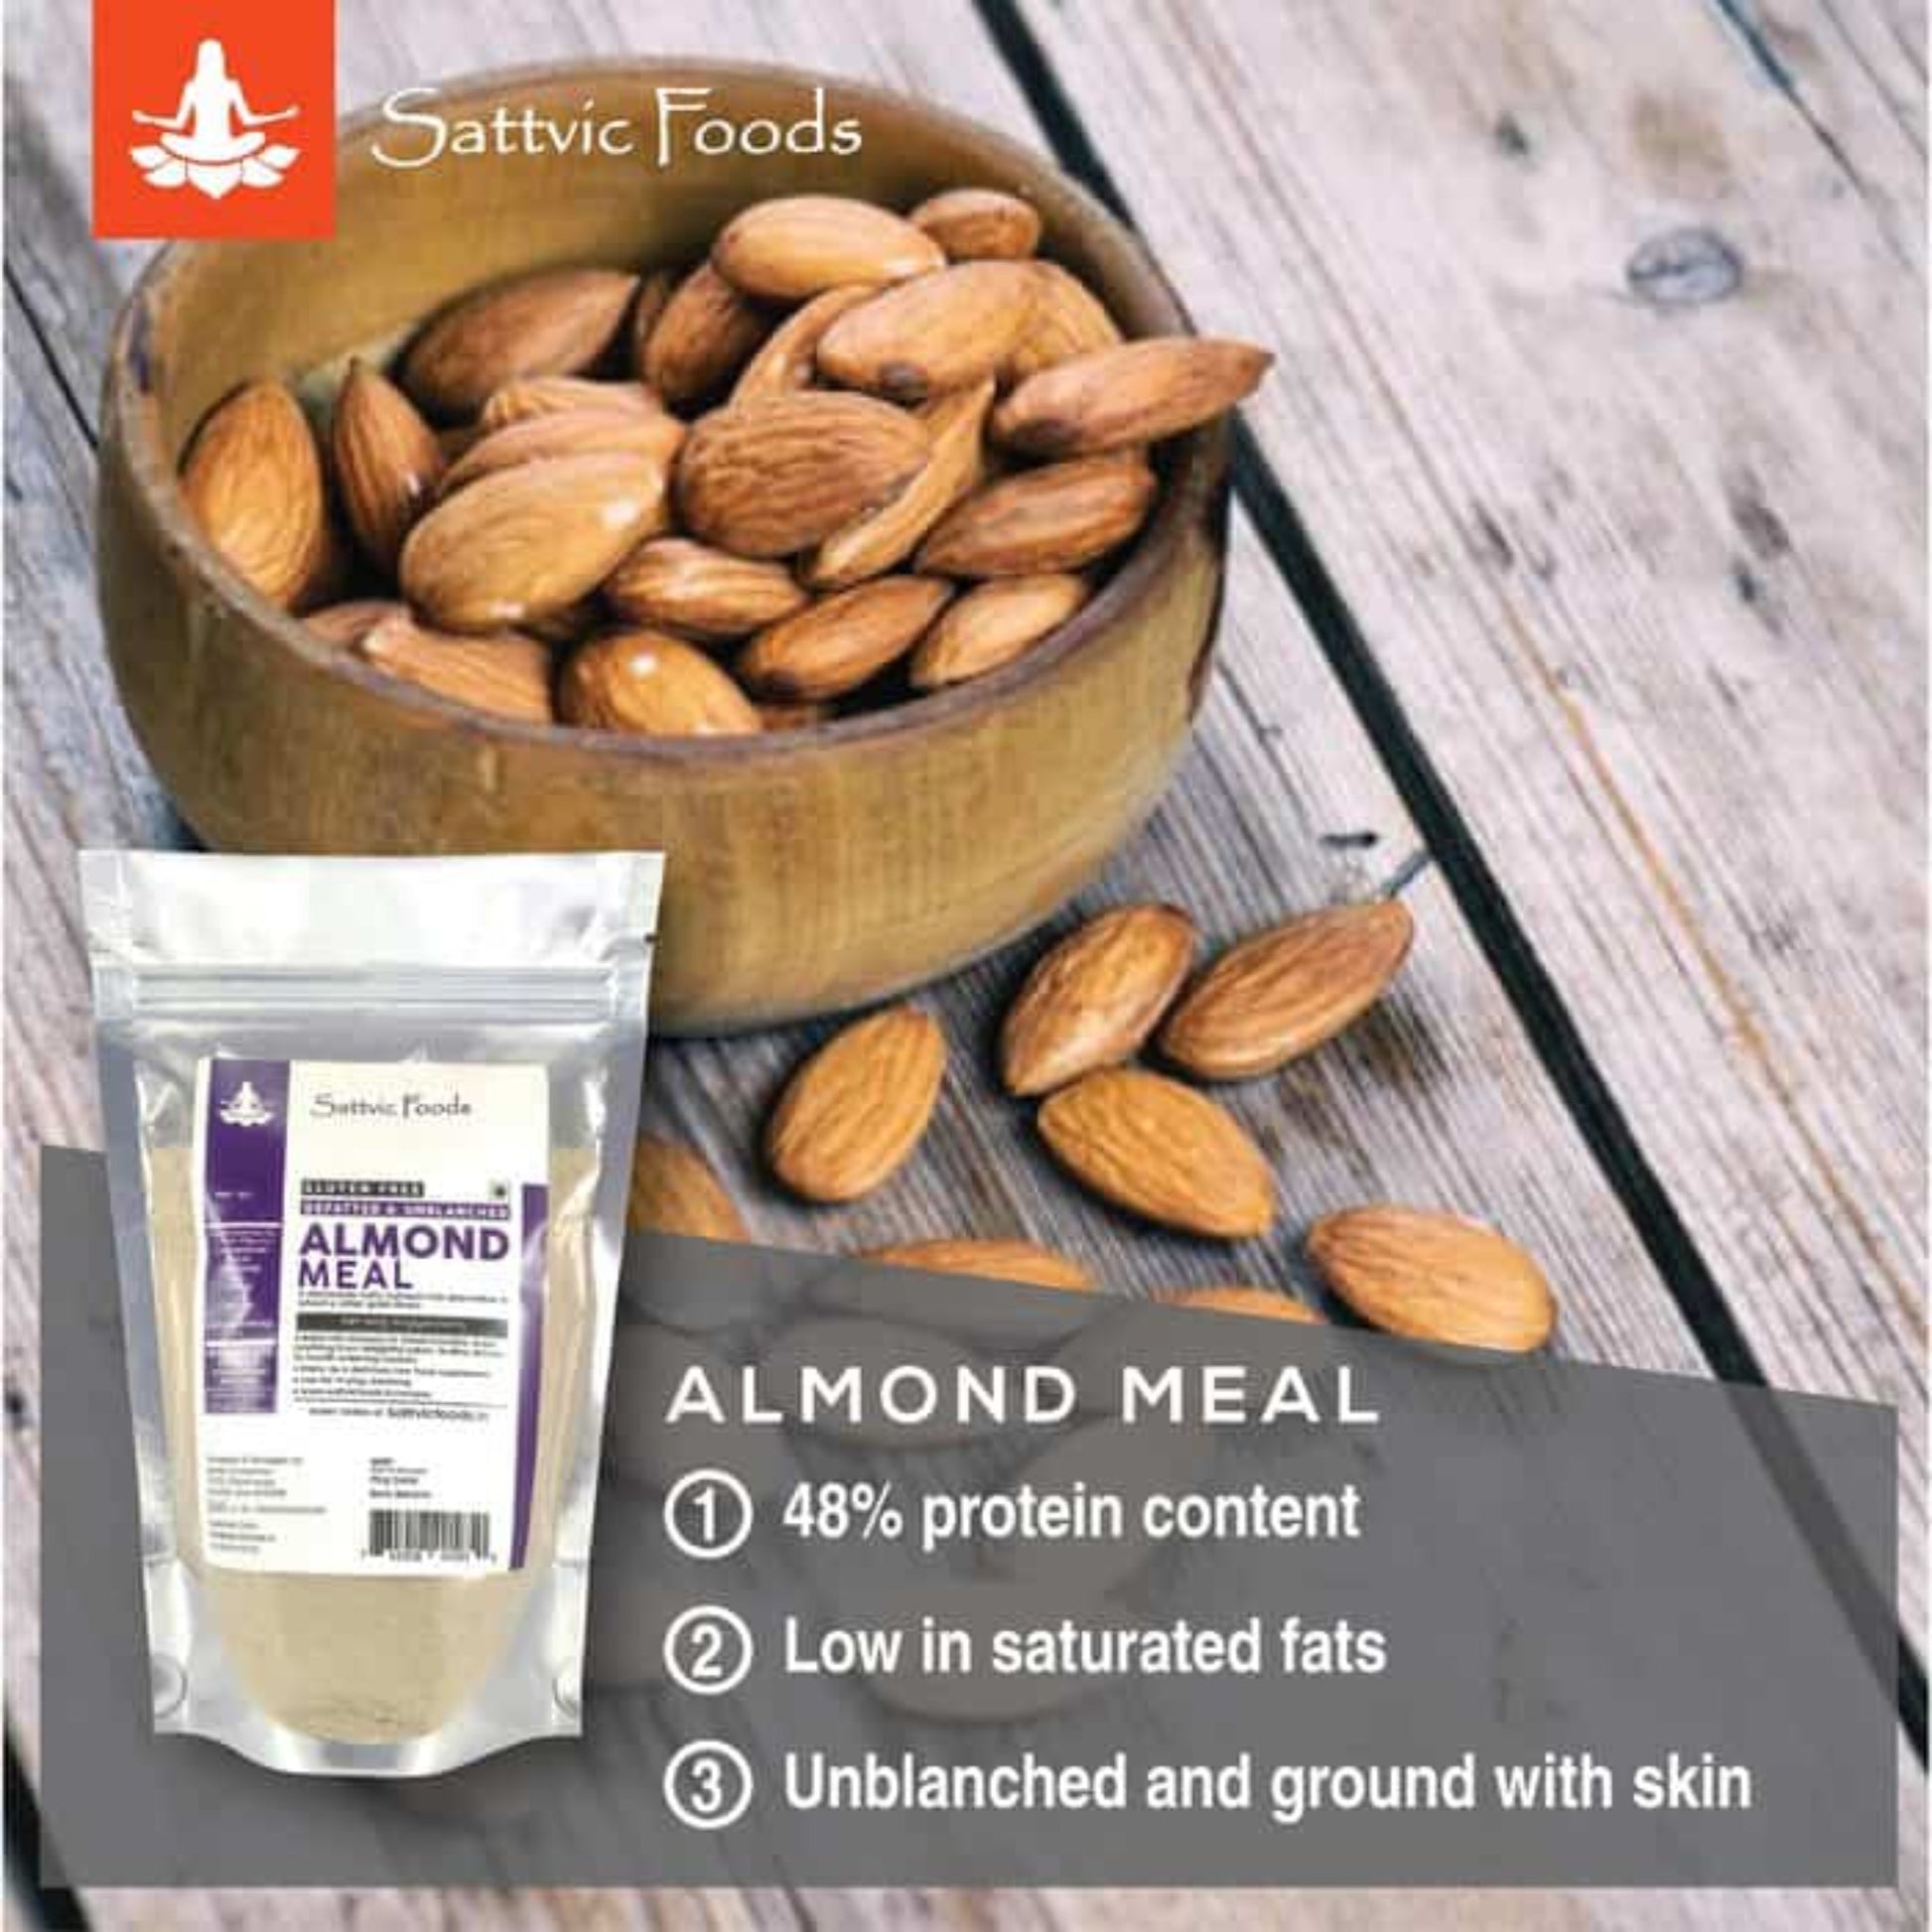 Almond Meal (Defatted, Unblanched, Low Carb, Keto-Friendly, Gluten Free) Sattvic Foods